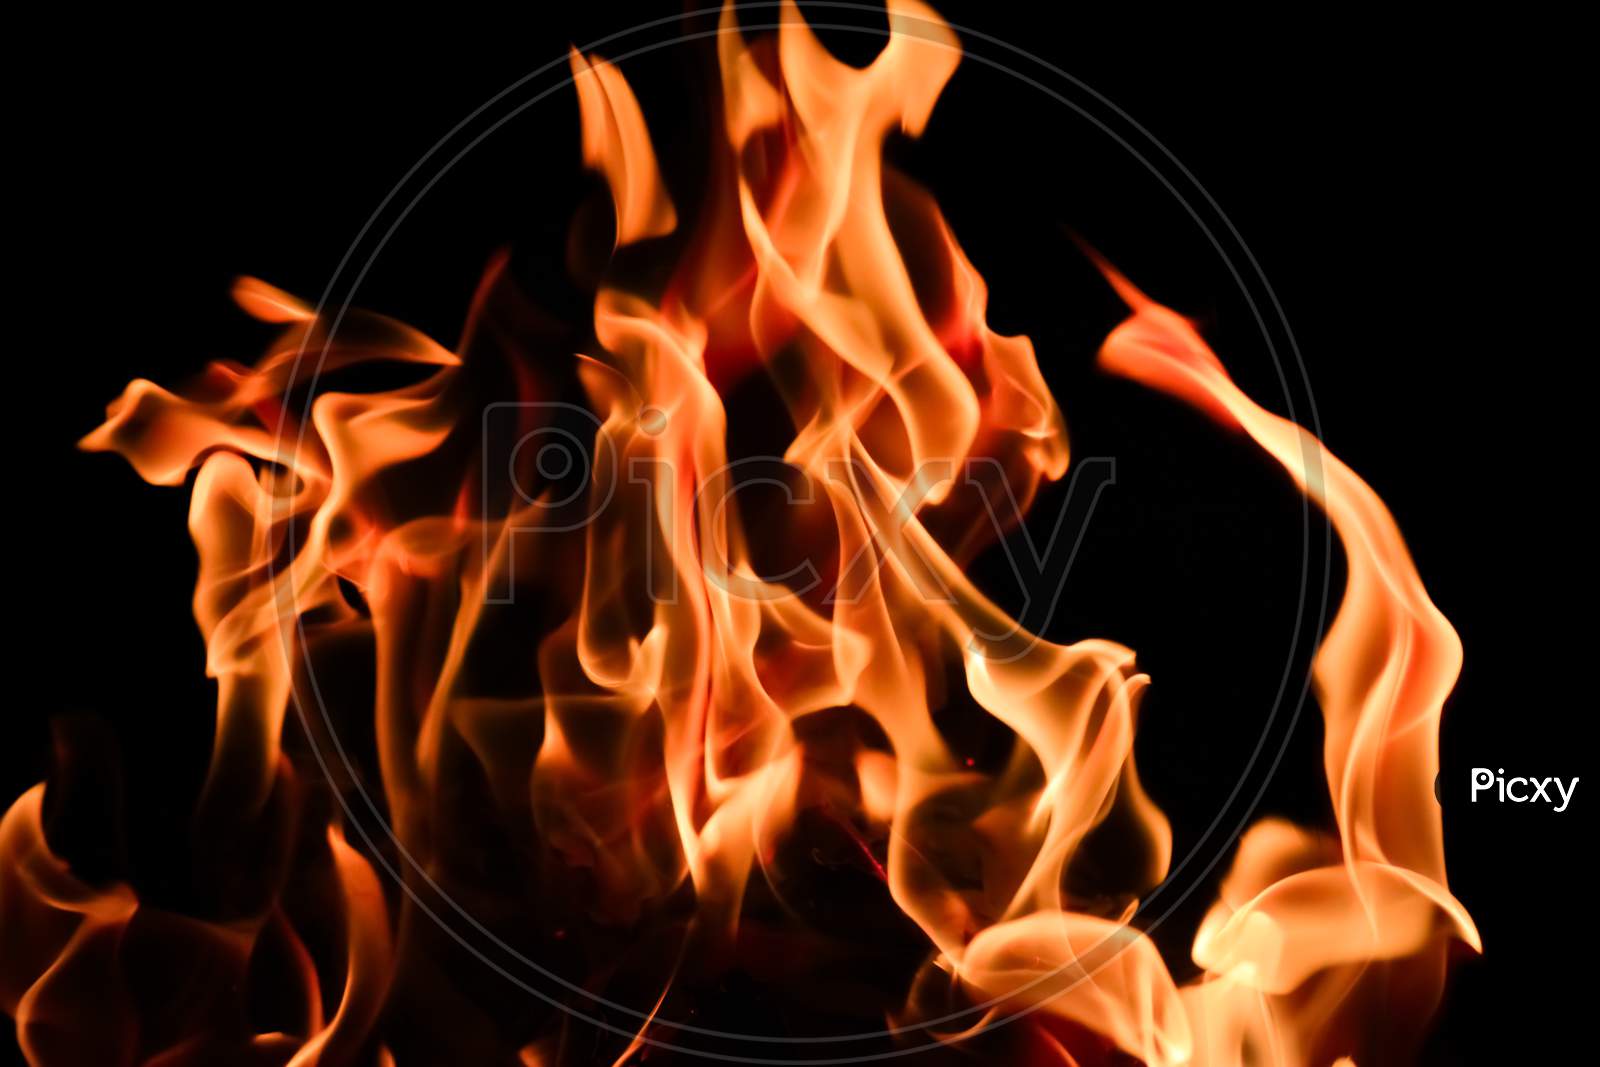 Close-up shot of the fire on black background